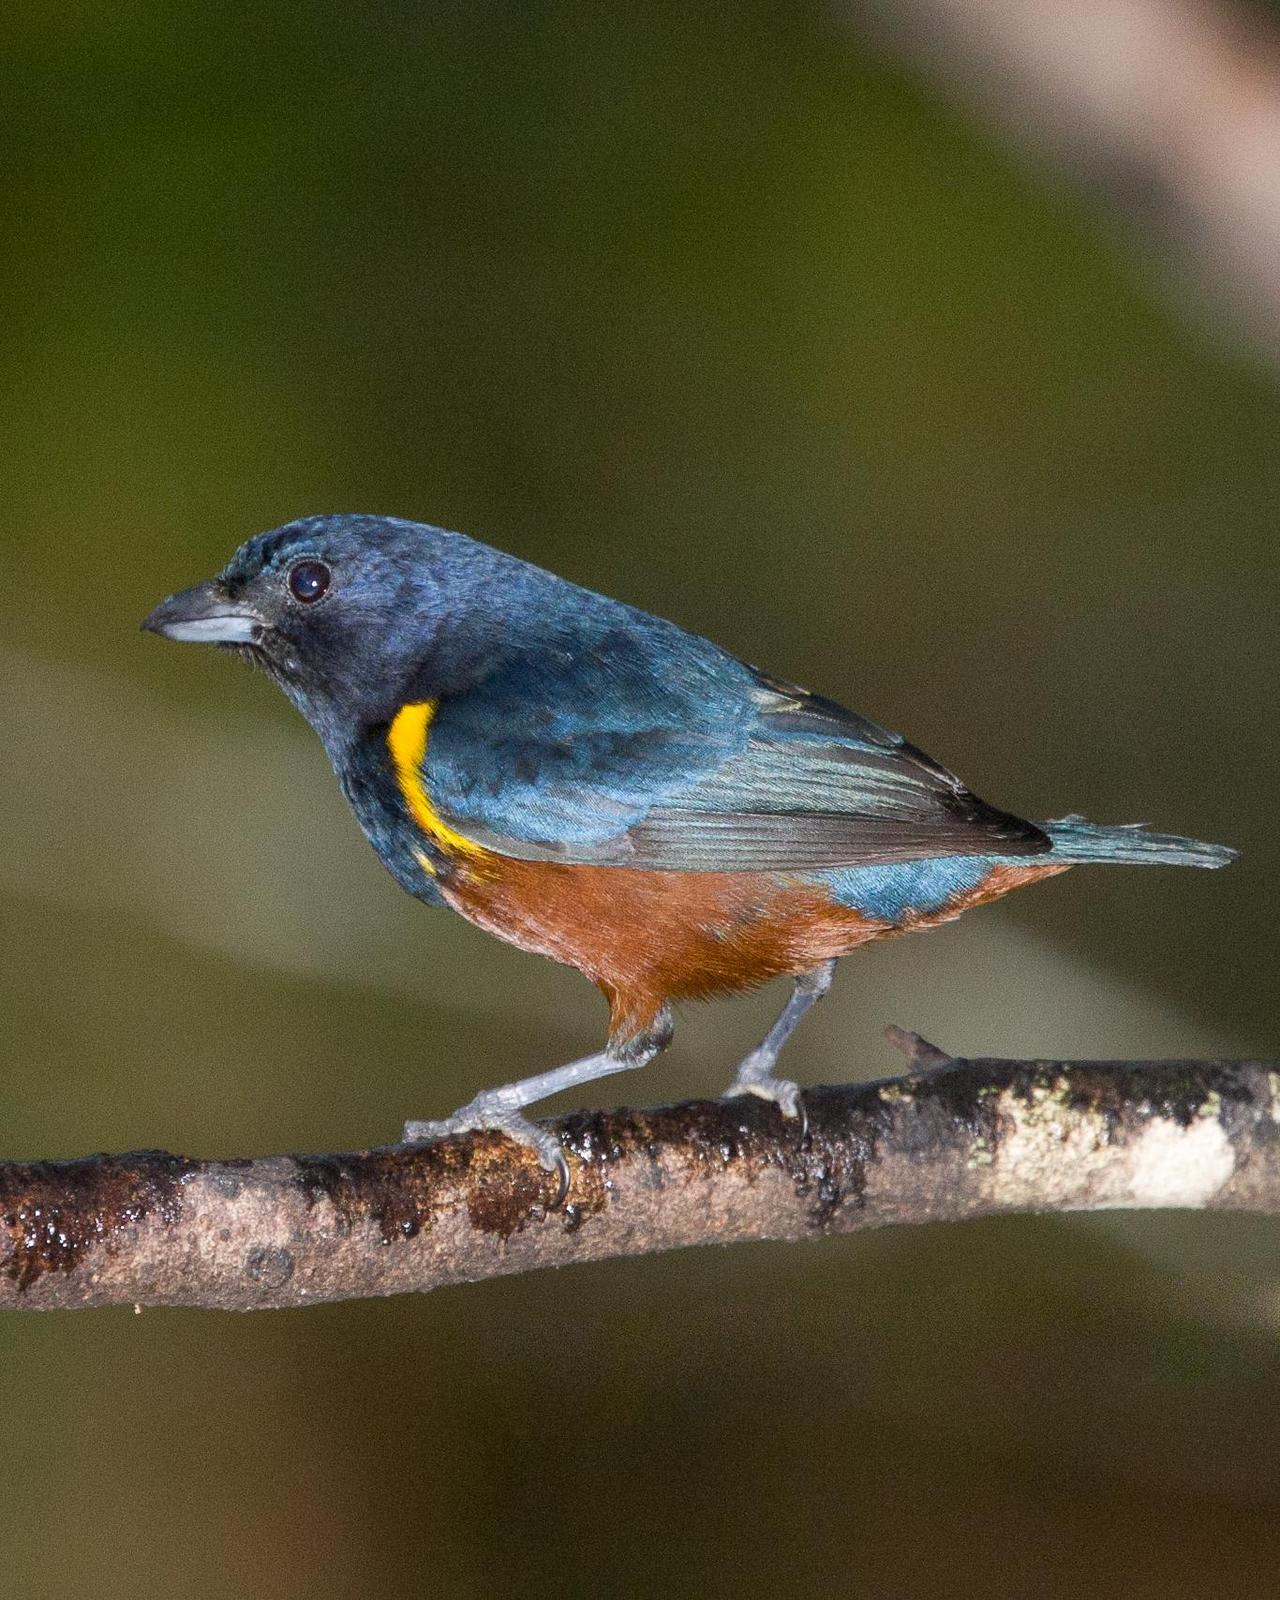 Chestnut-bellied Euphonia Photo by Robert Lewis